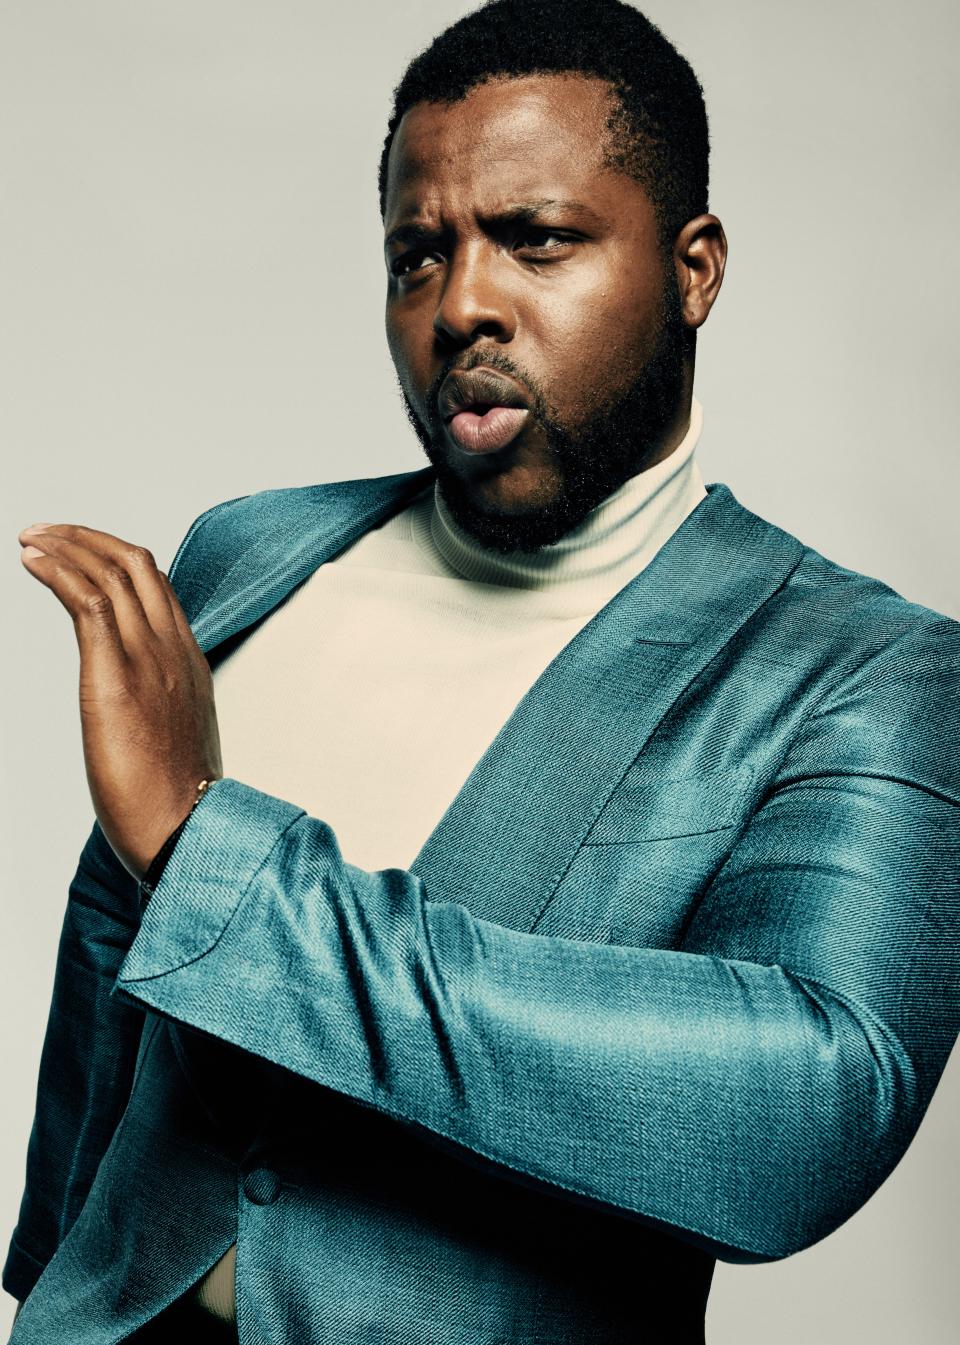 Earlier this year, he broke out in <em>Black Panther</em>. Next year he’s in Jordan Peele’s much anticipated <em>Get Out</em> follow-up, <em>Us</em>. And he’s invented a new way to describe it.